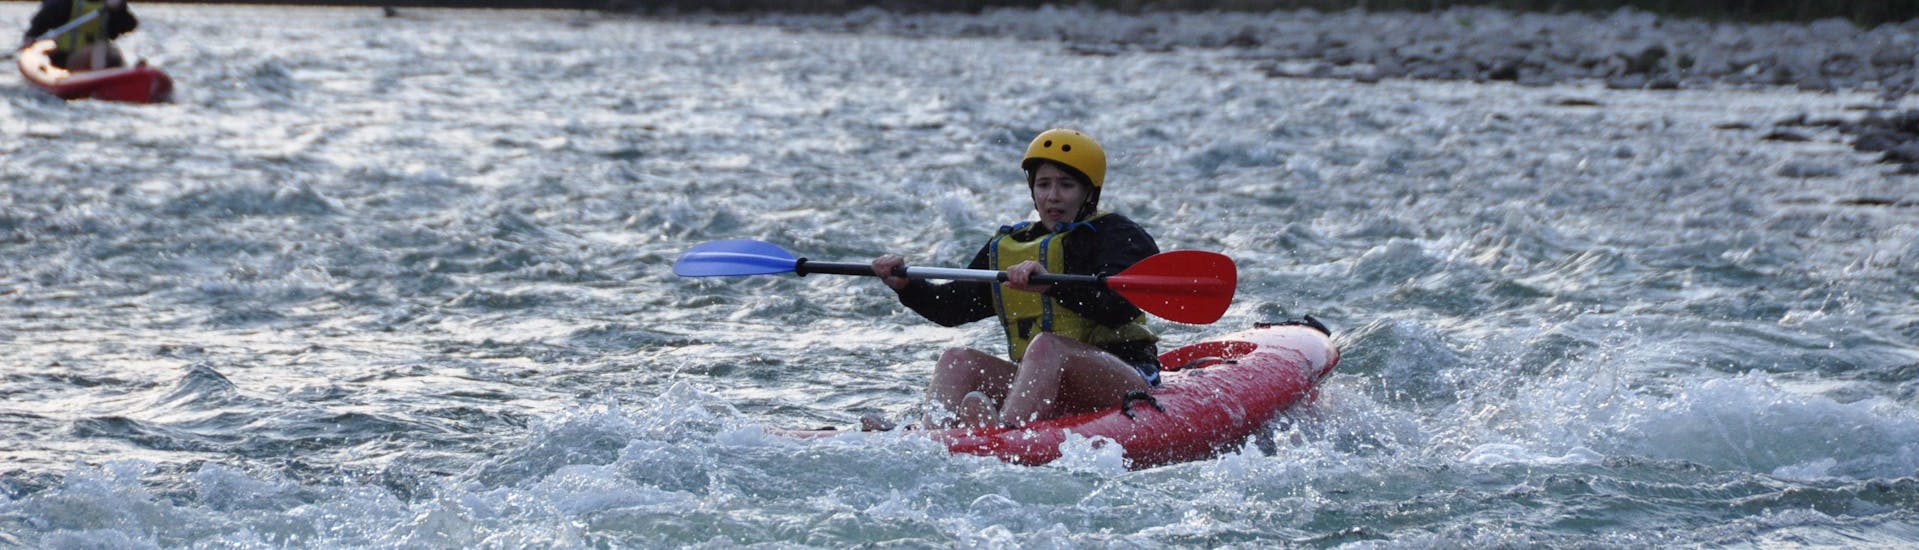 Kayak on the Adige River in the Terra dei Forti with Pescantina Rafting Bussolengo - Hero image